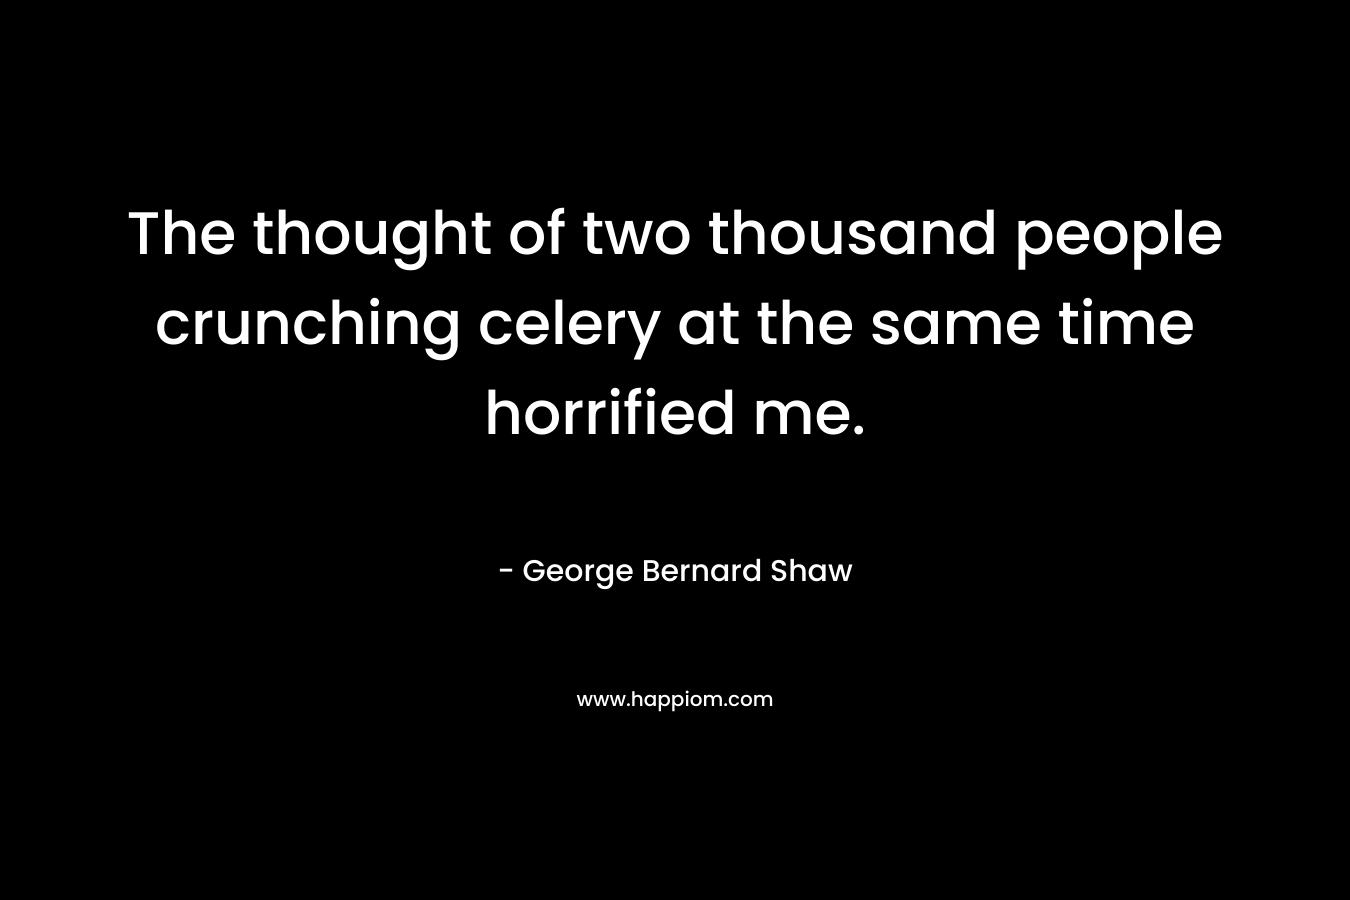 The thought of two thousand people crunching celery at the same time horrified me. – George Bernard Shaw